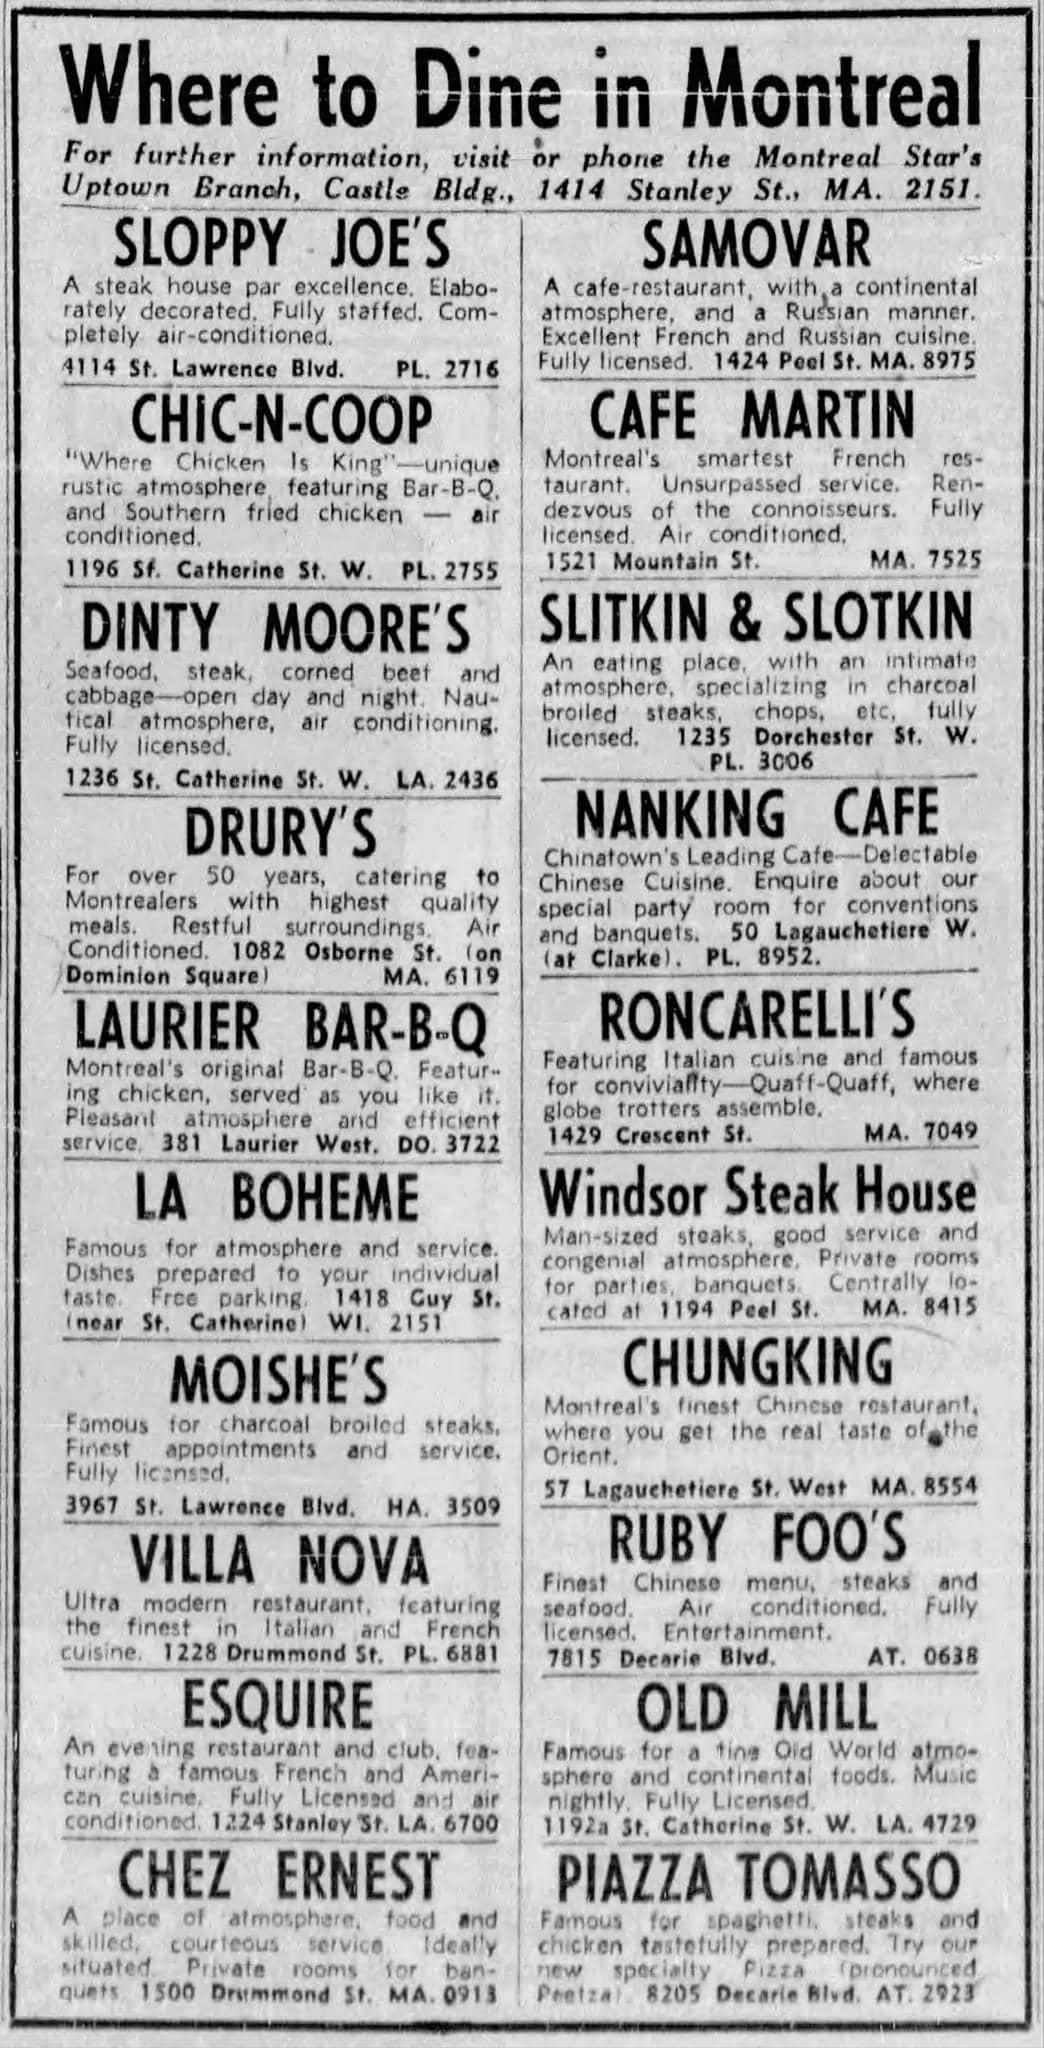 Where to dine in Montreal. 1946.jpeg